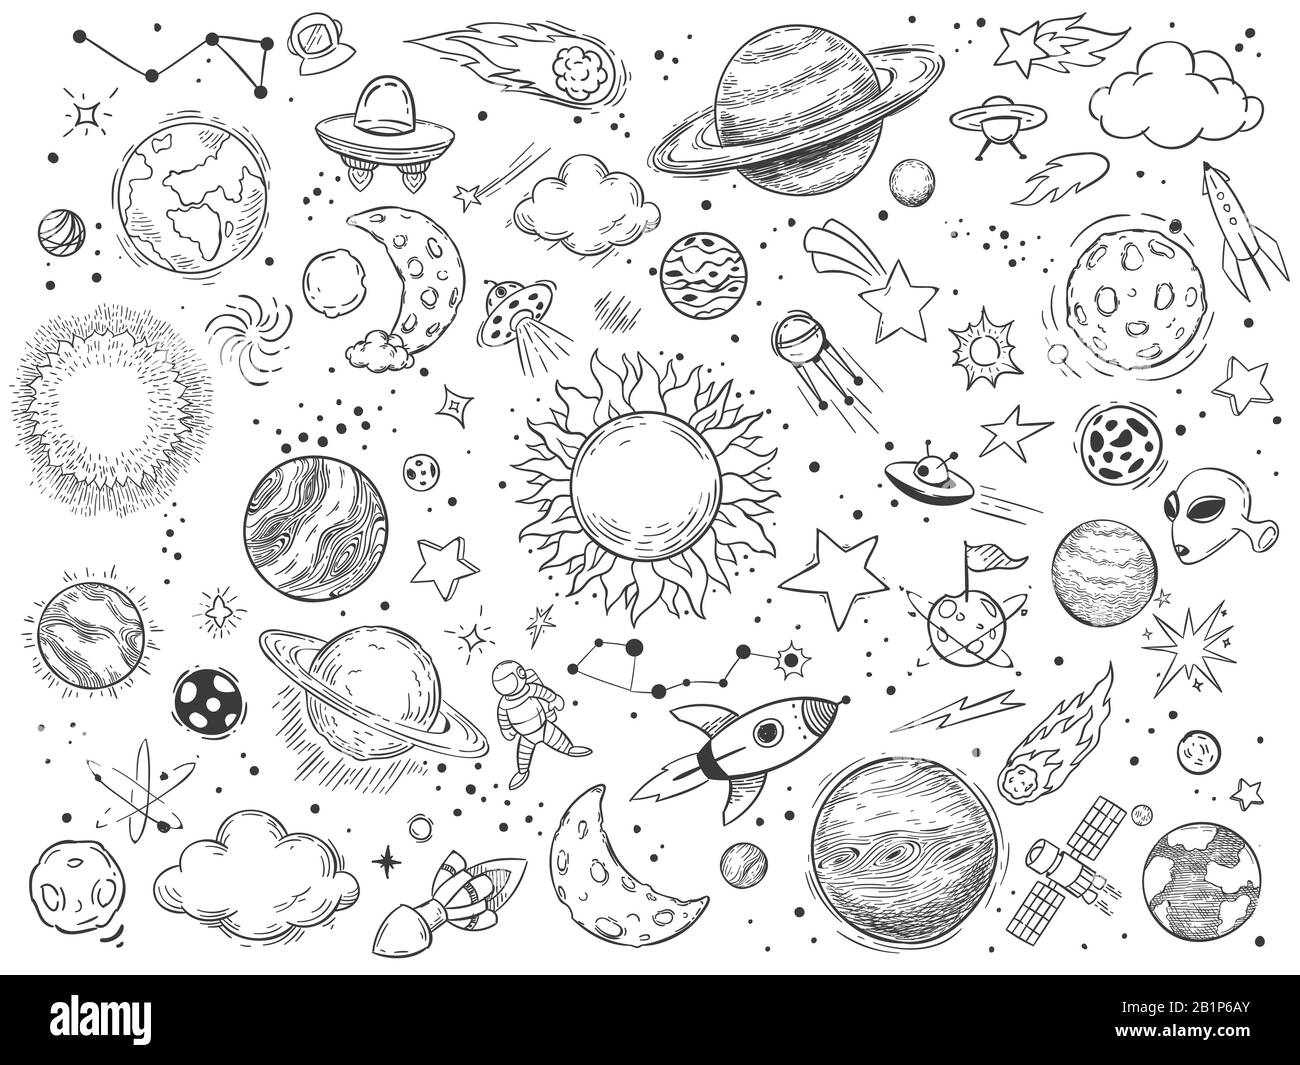 Space doodle. Astrology doodles, sketch space universe planets and hand drawn cosmic rocket vector illustration set. Black and white celestial bodies Stock Vector